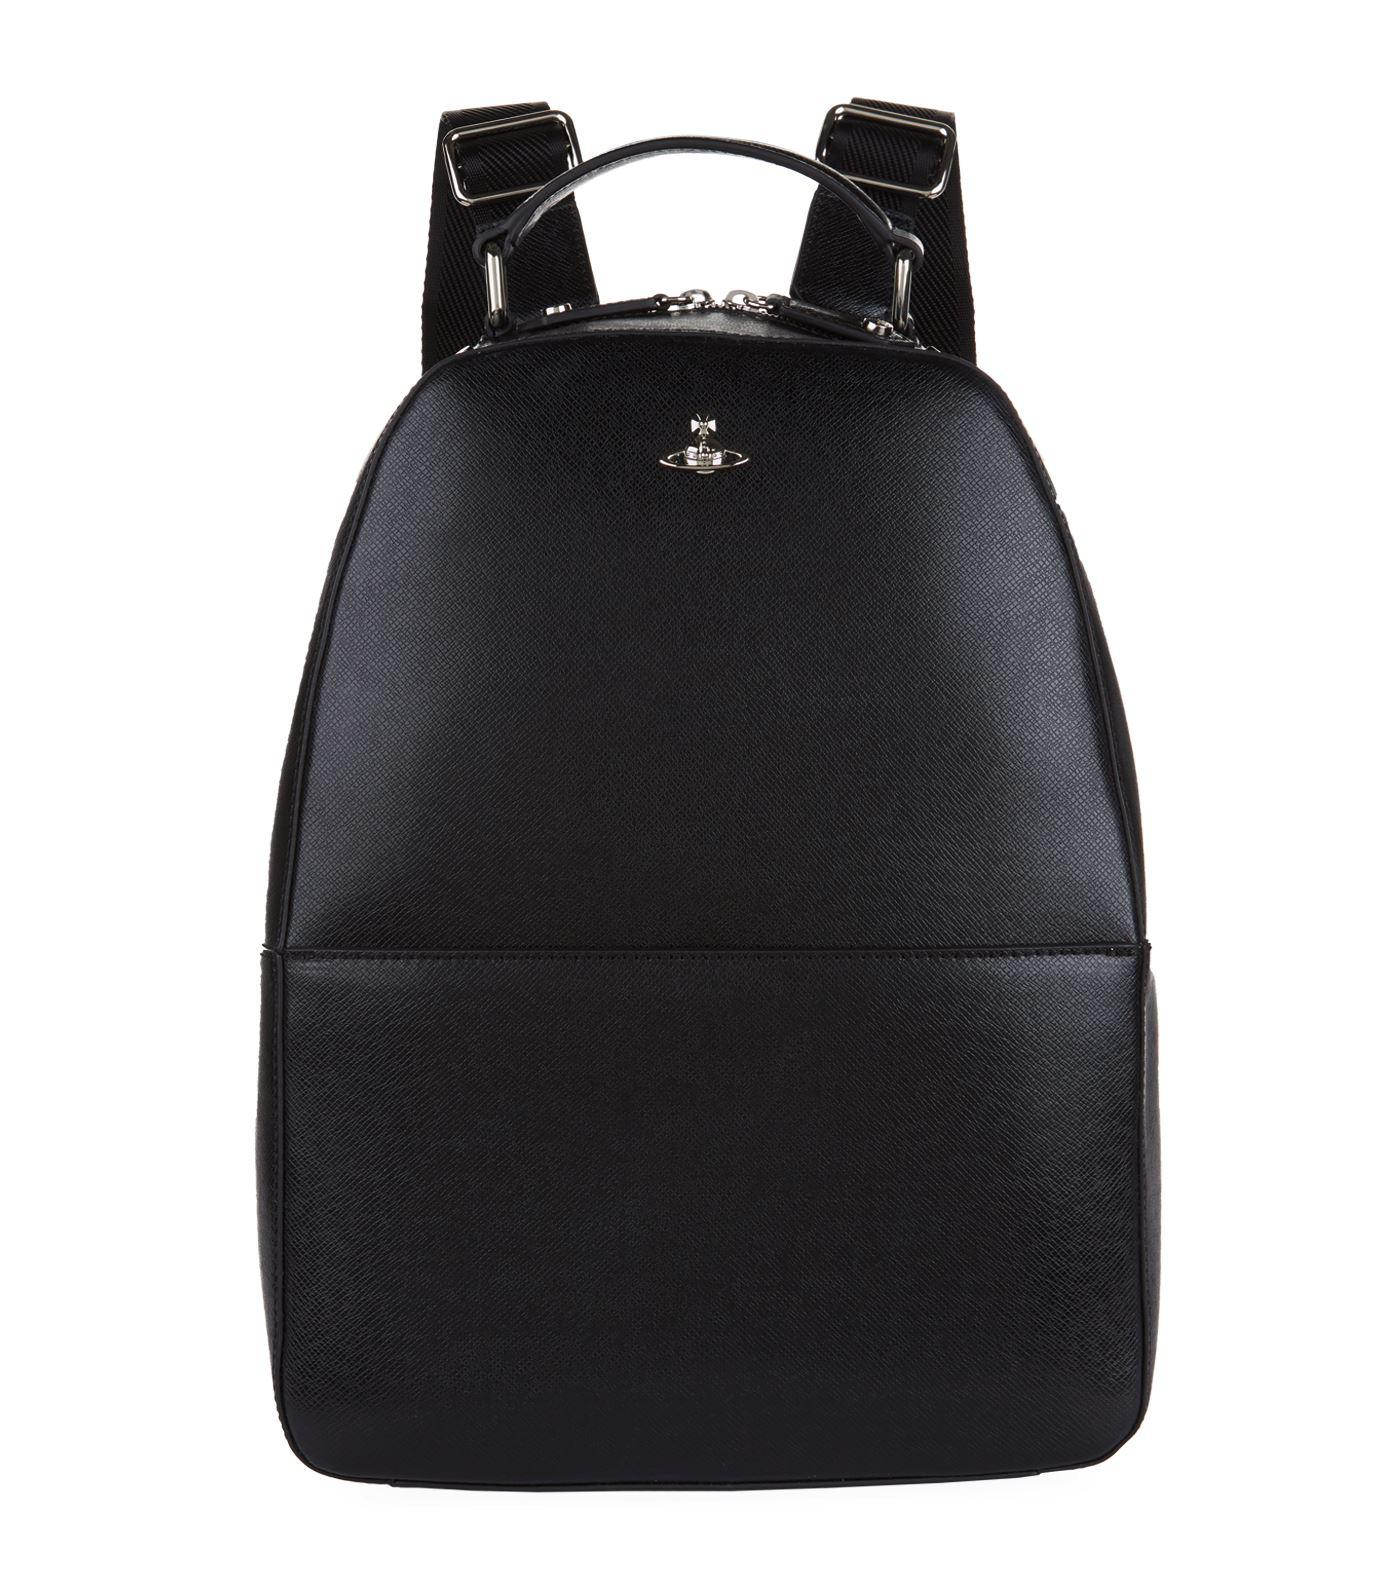 Vivienne Westwood Kent New Saffiano Leather Backpack - Accessories